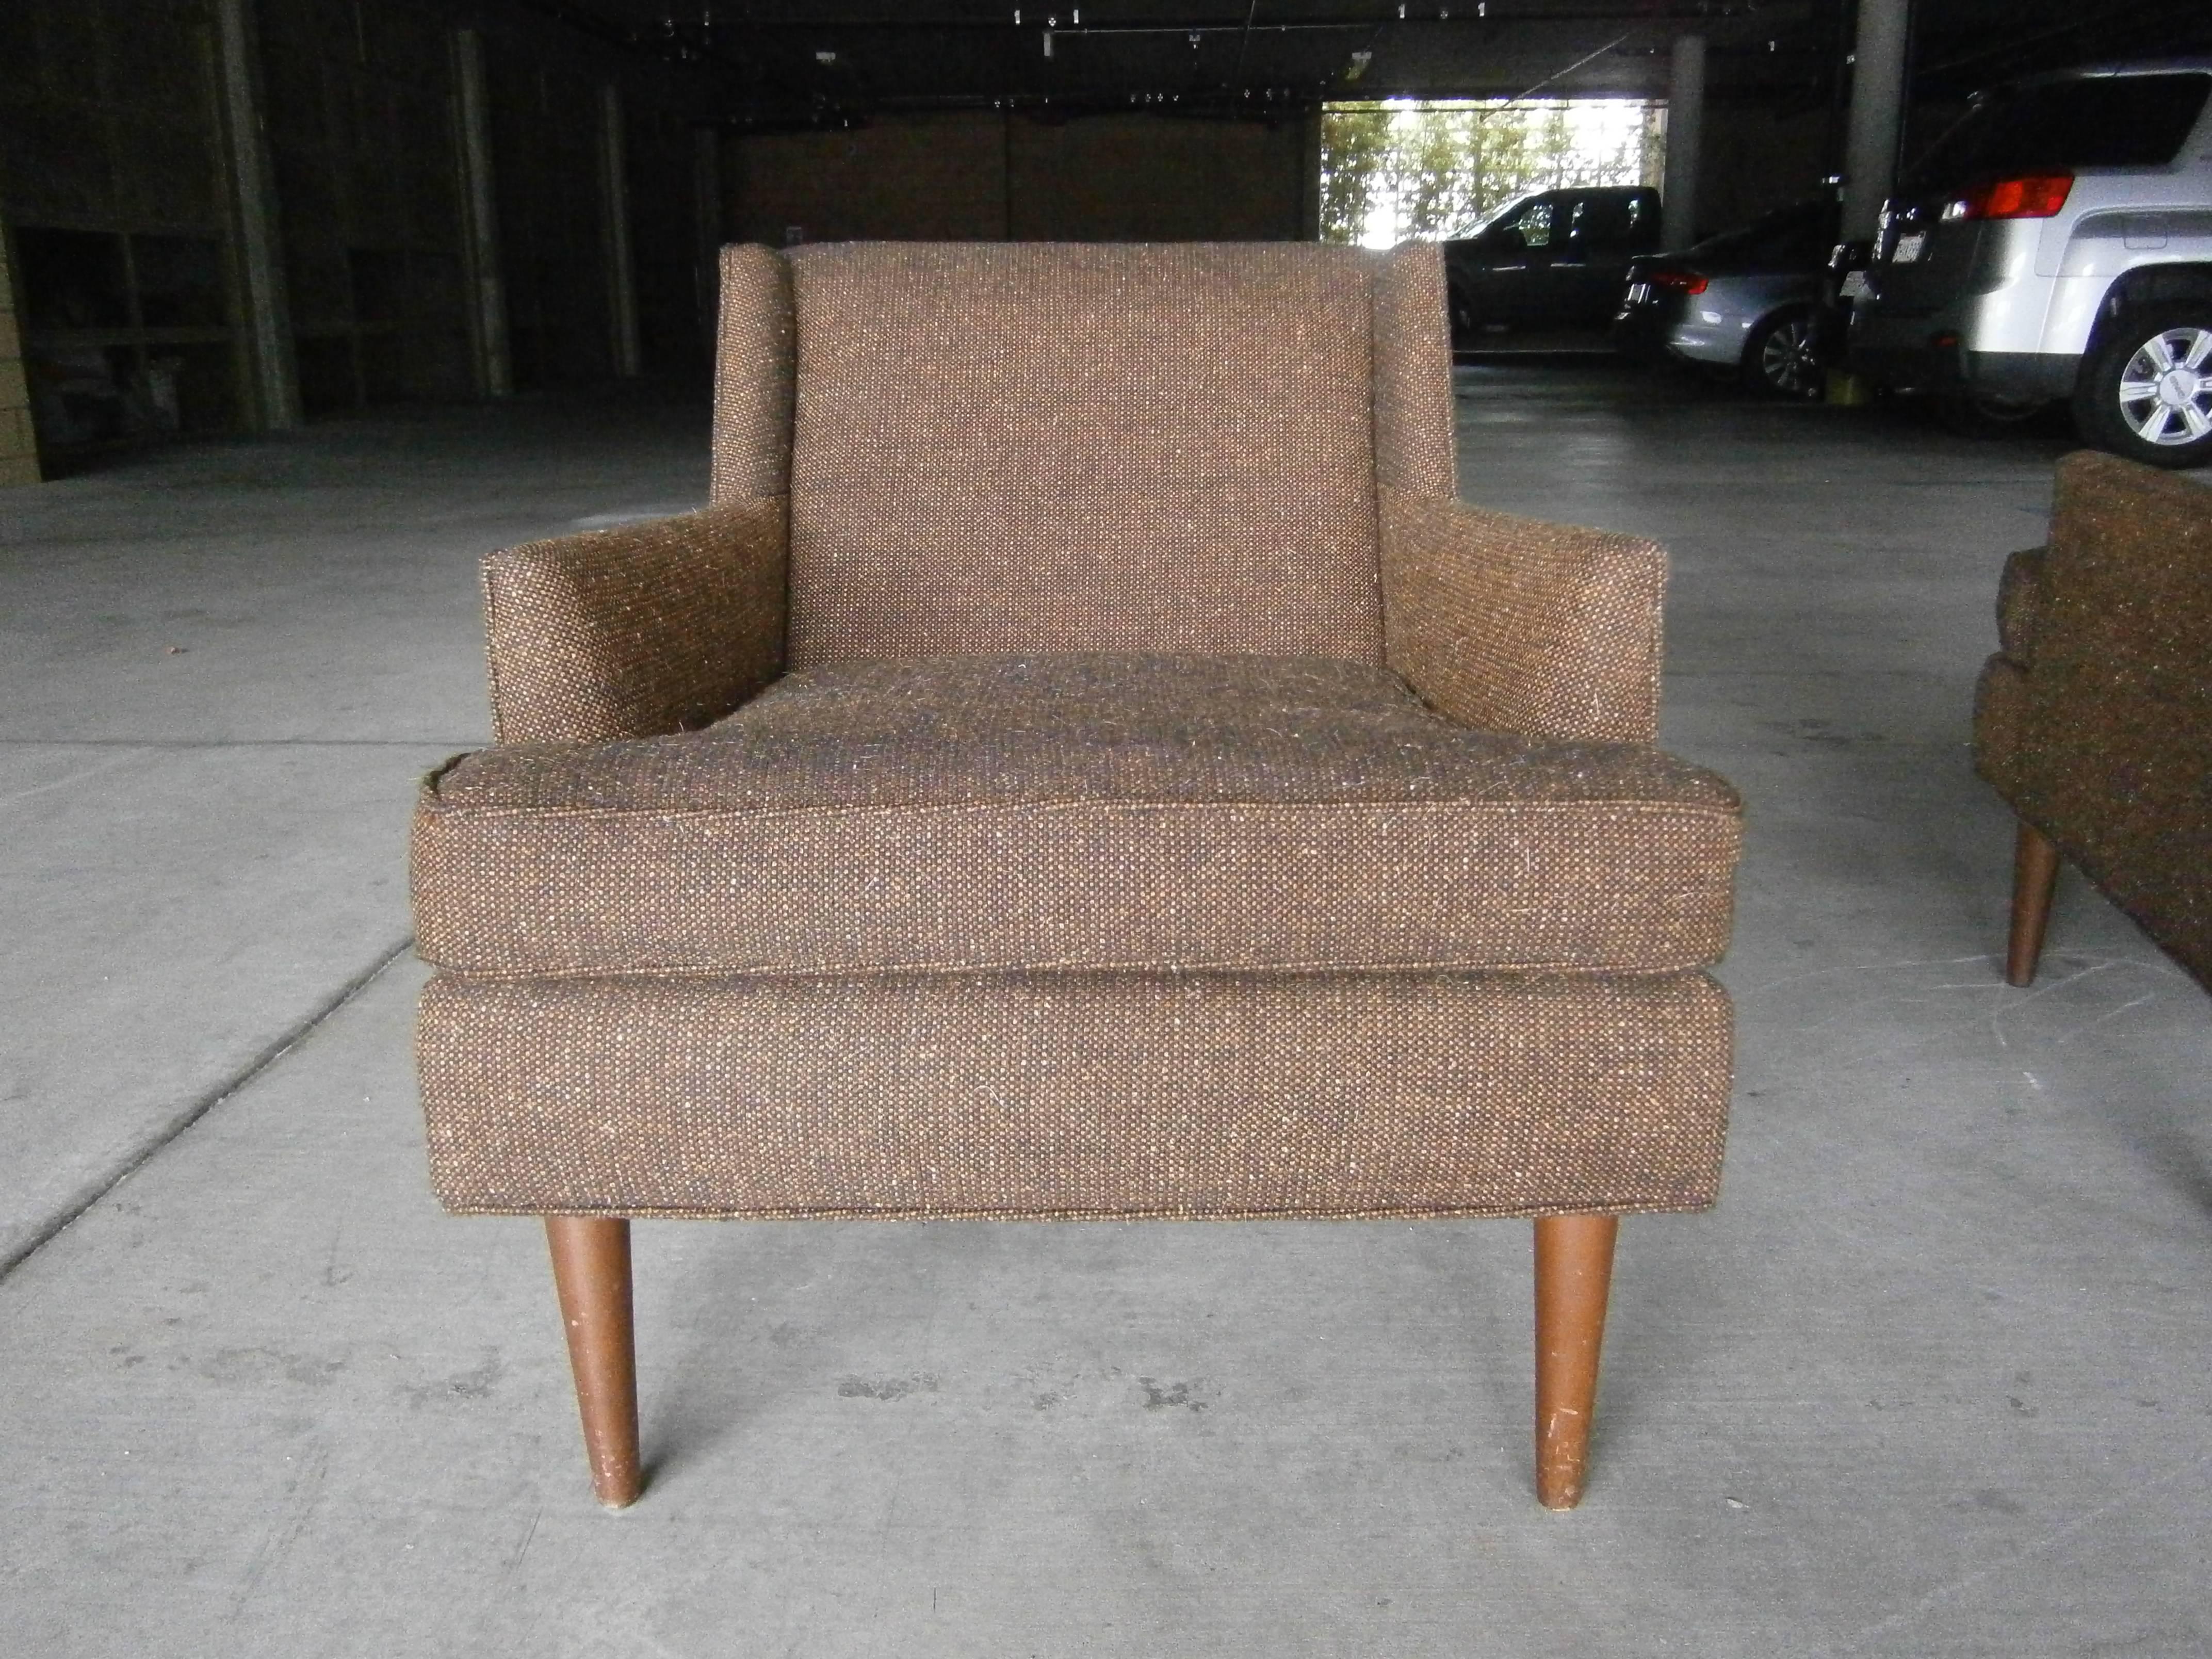 An intriguing set of two fully upholstered Mid Century Modern armchairs from the 1950s. Referred to as 